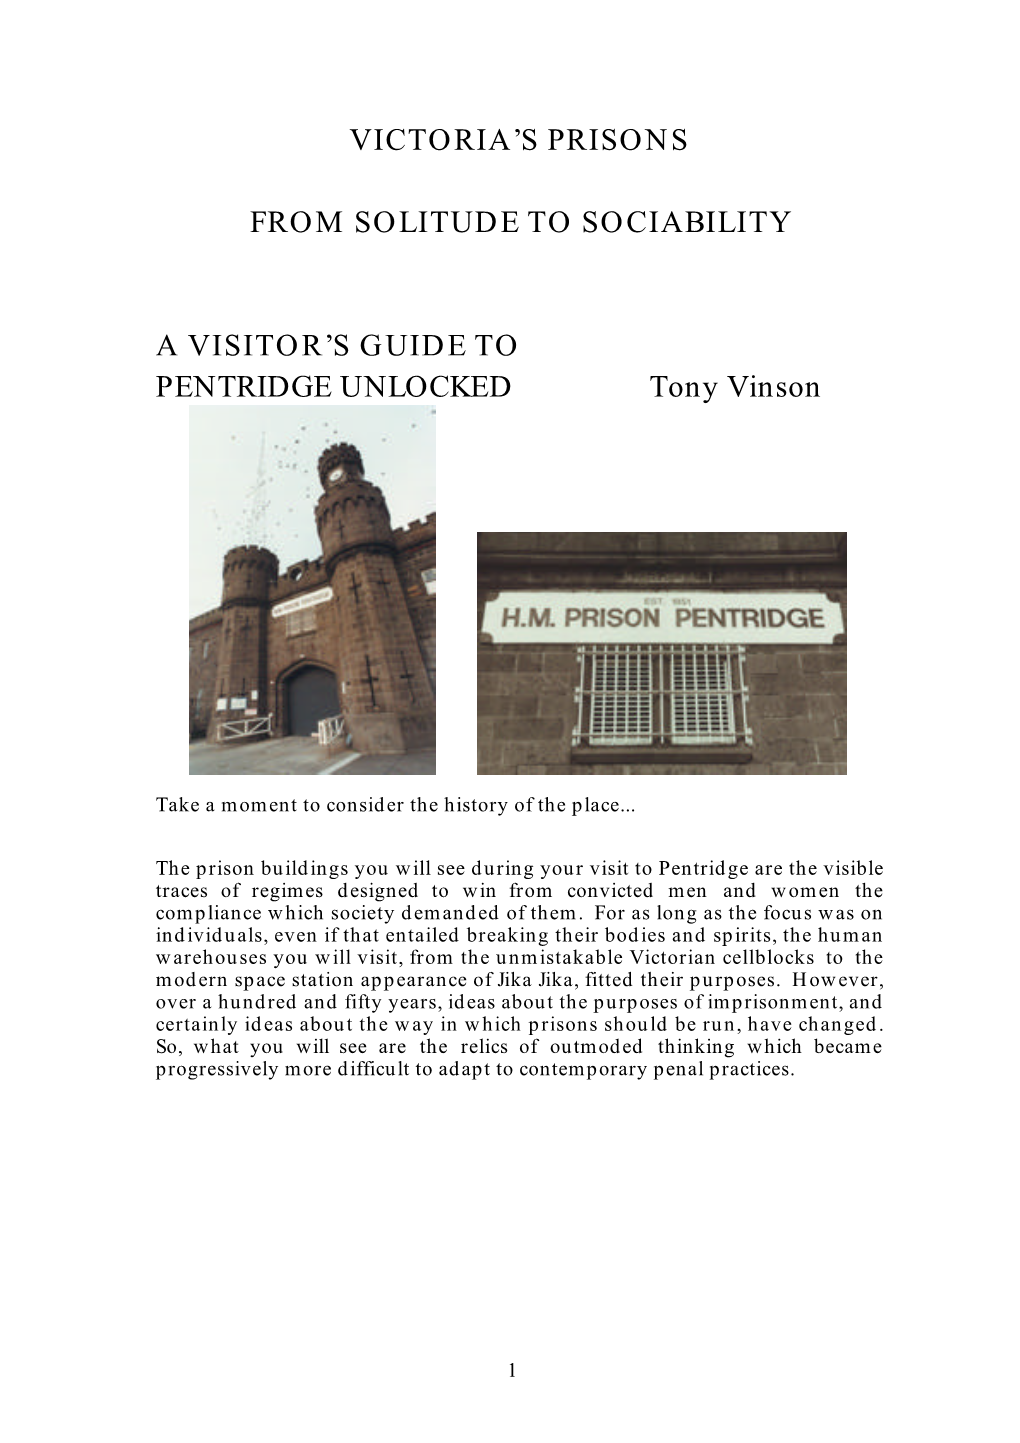 Victoria's Prisons from Solitude to Sociability A